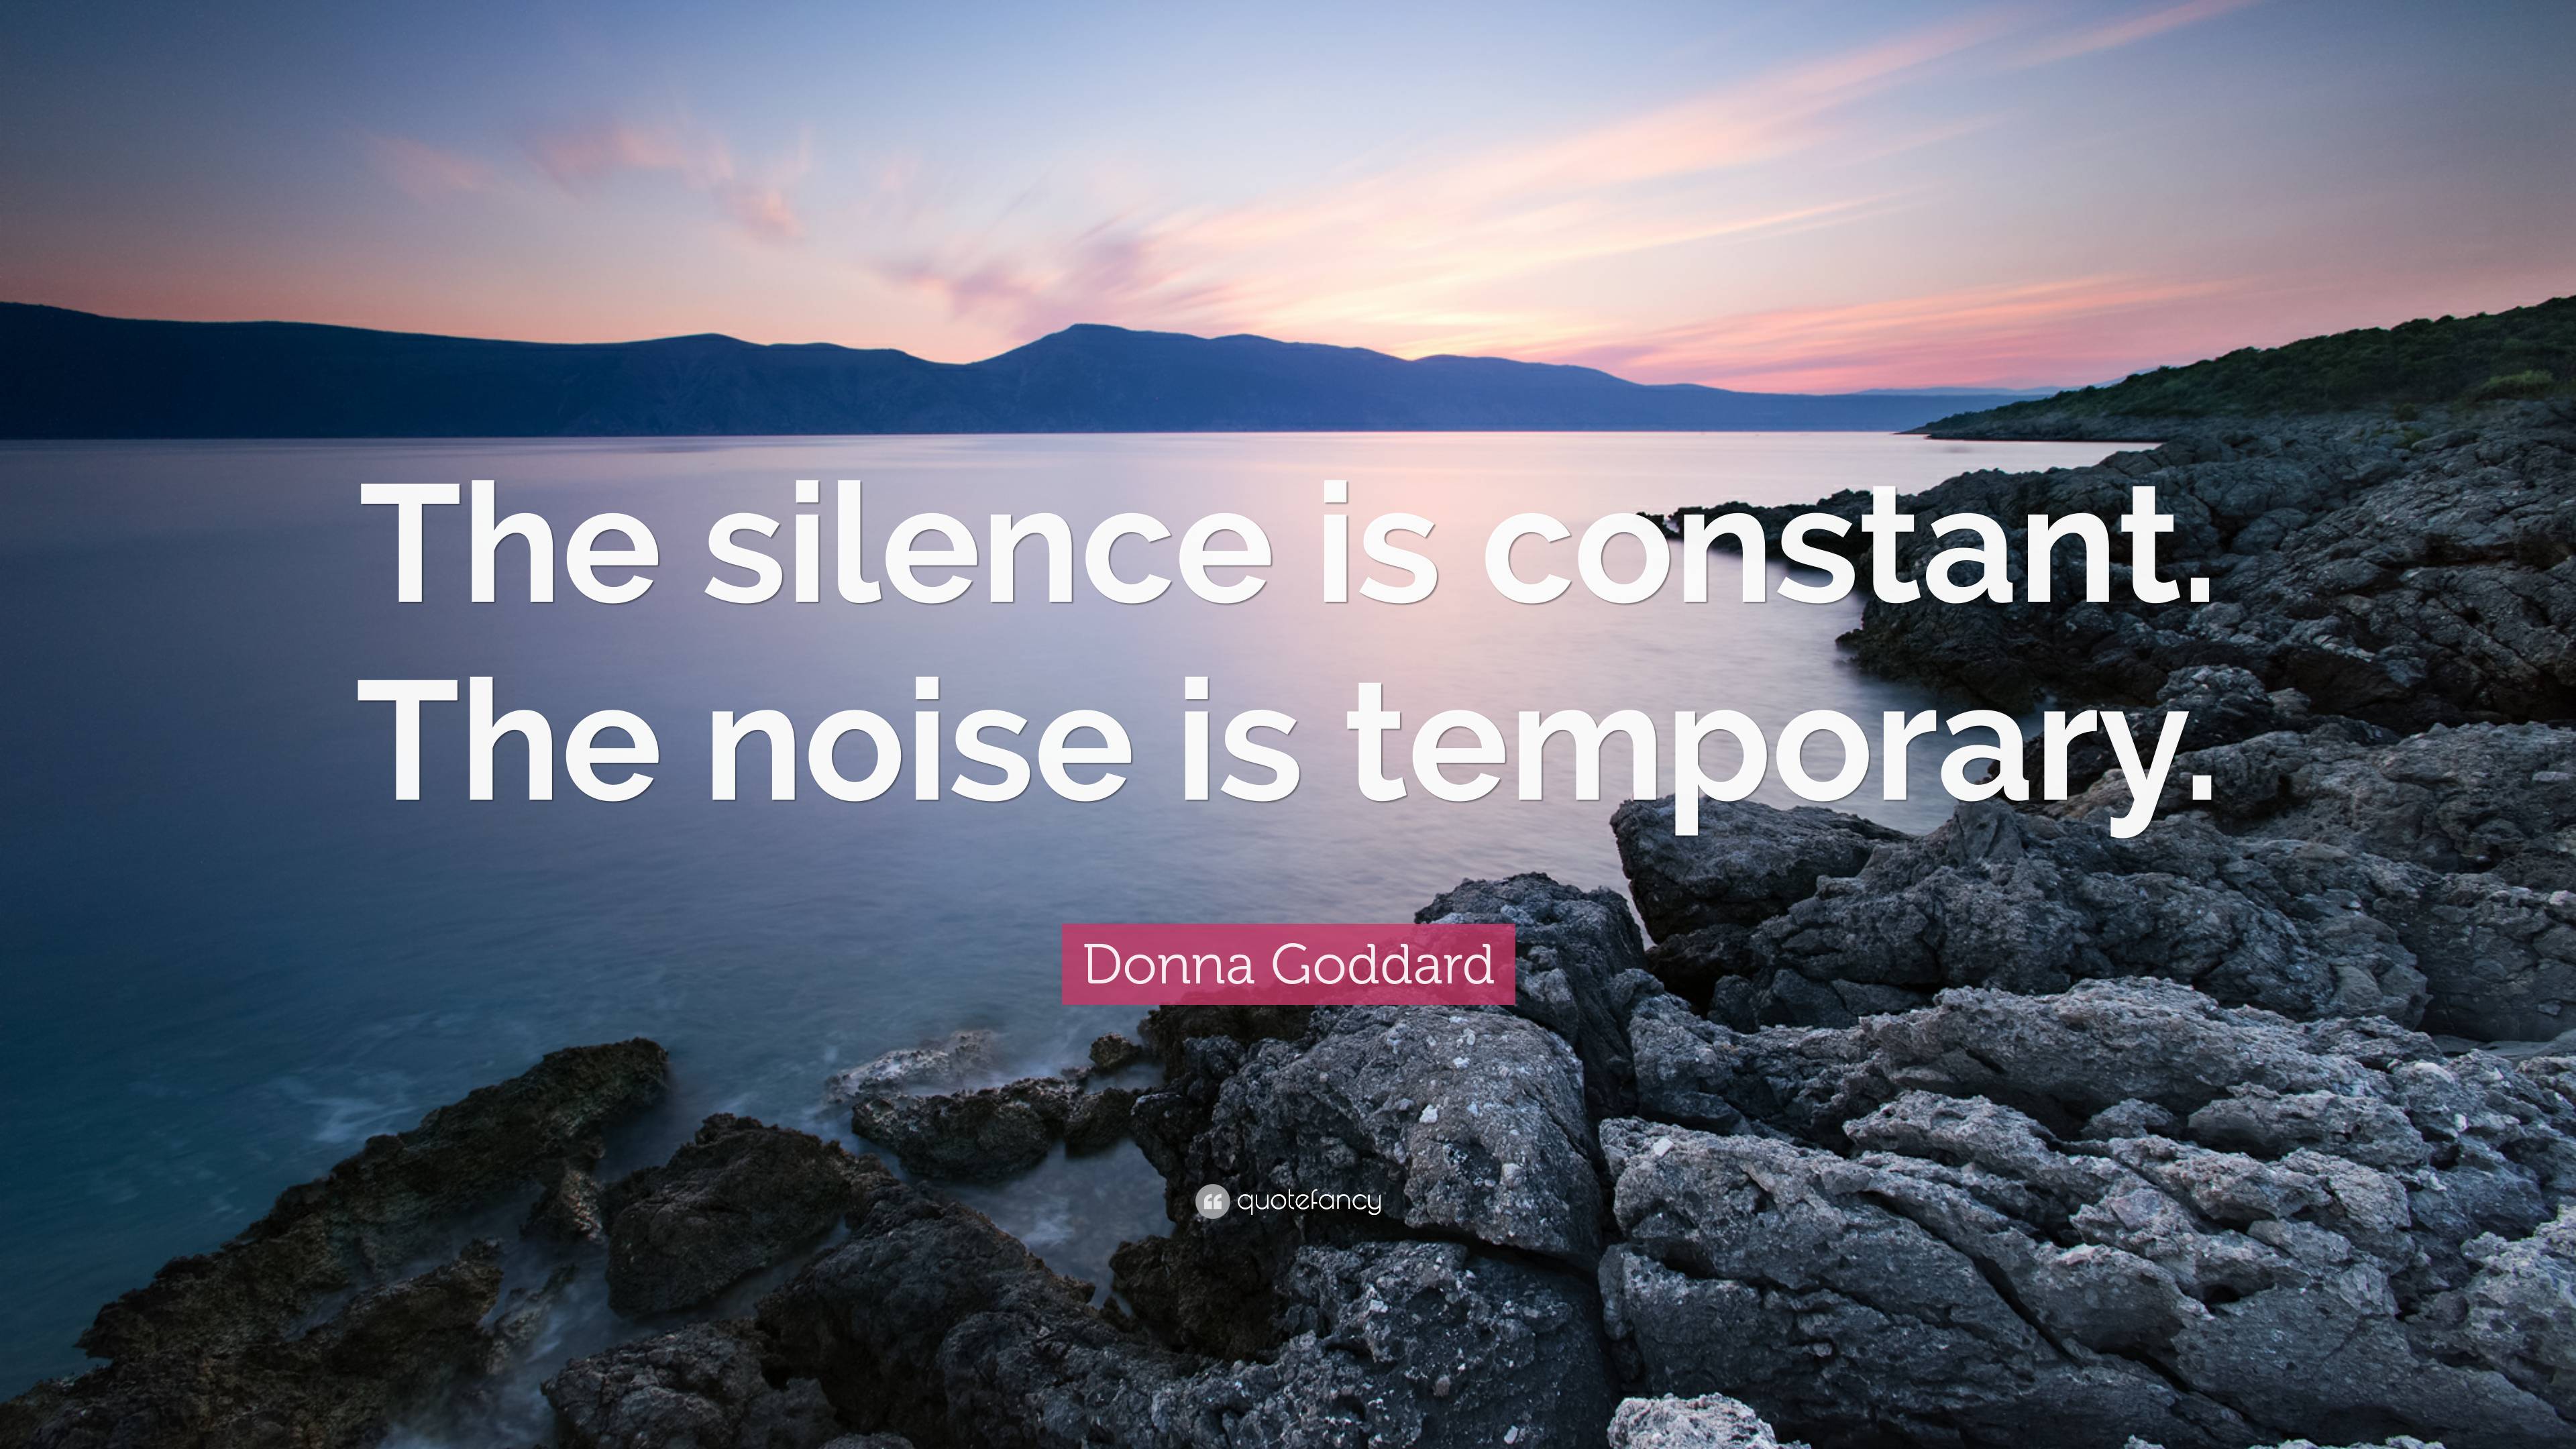 Donna Goddard Quote: “The silence is constant. The noise is temporary.”